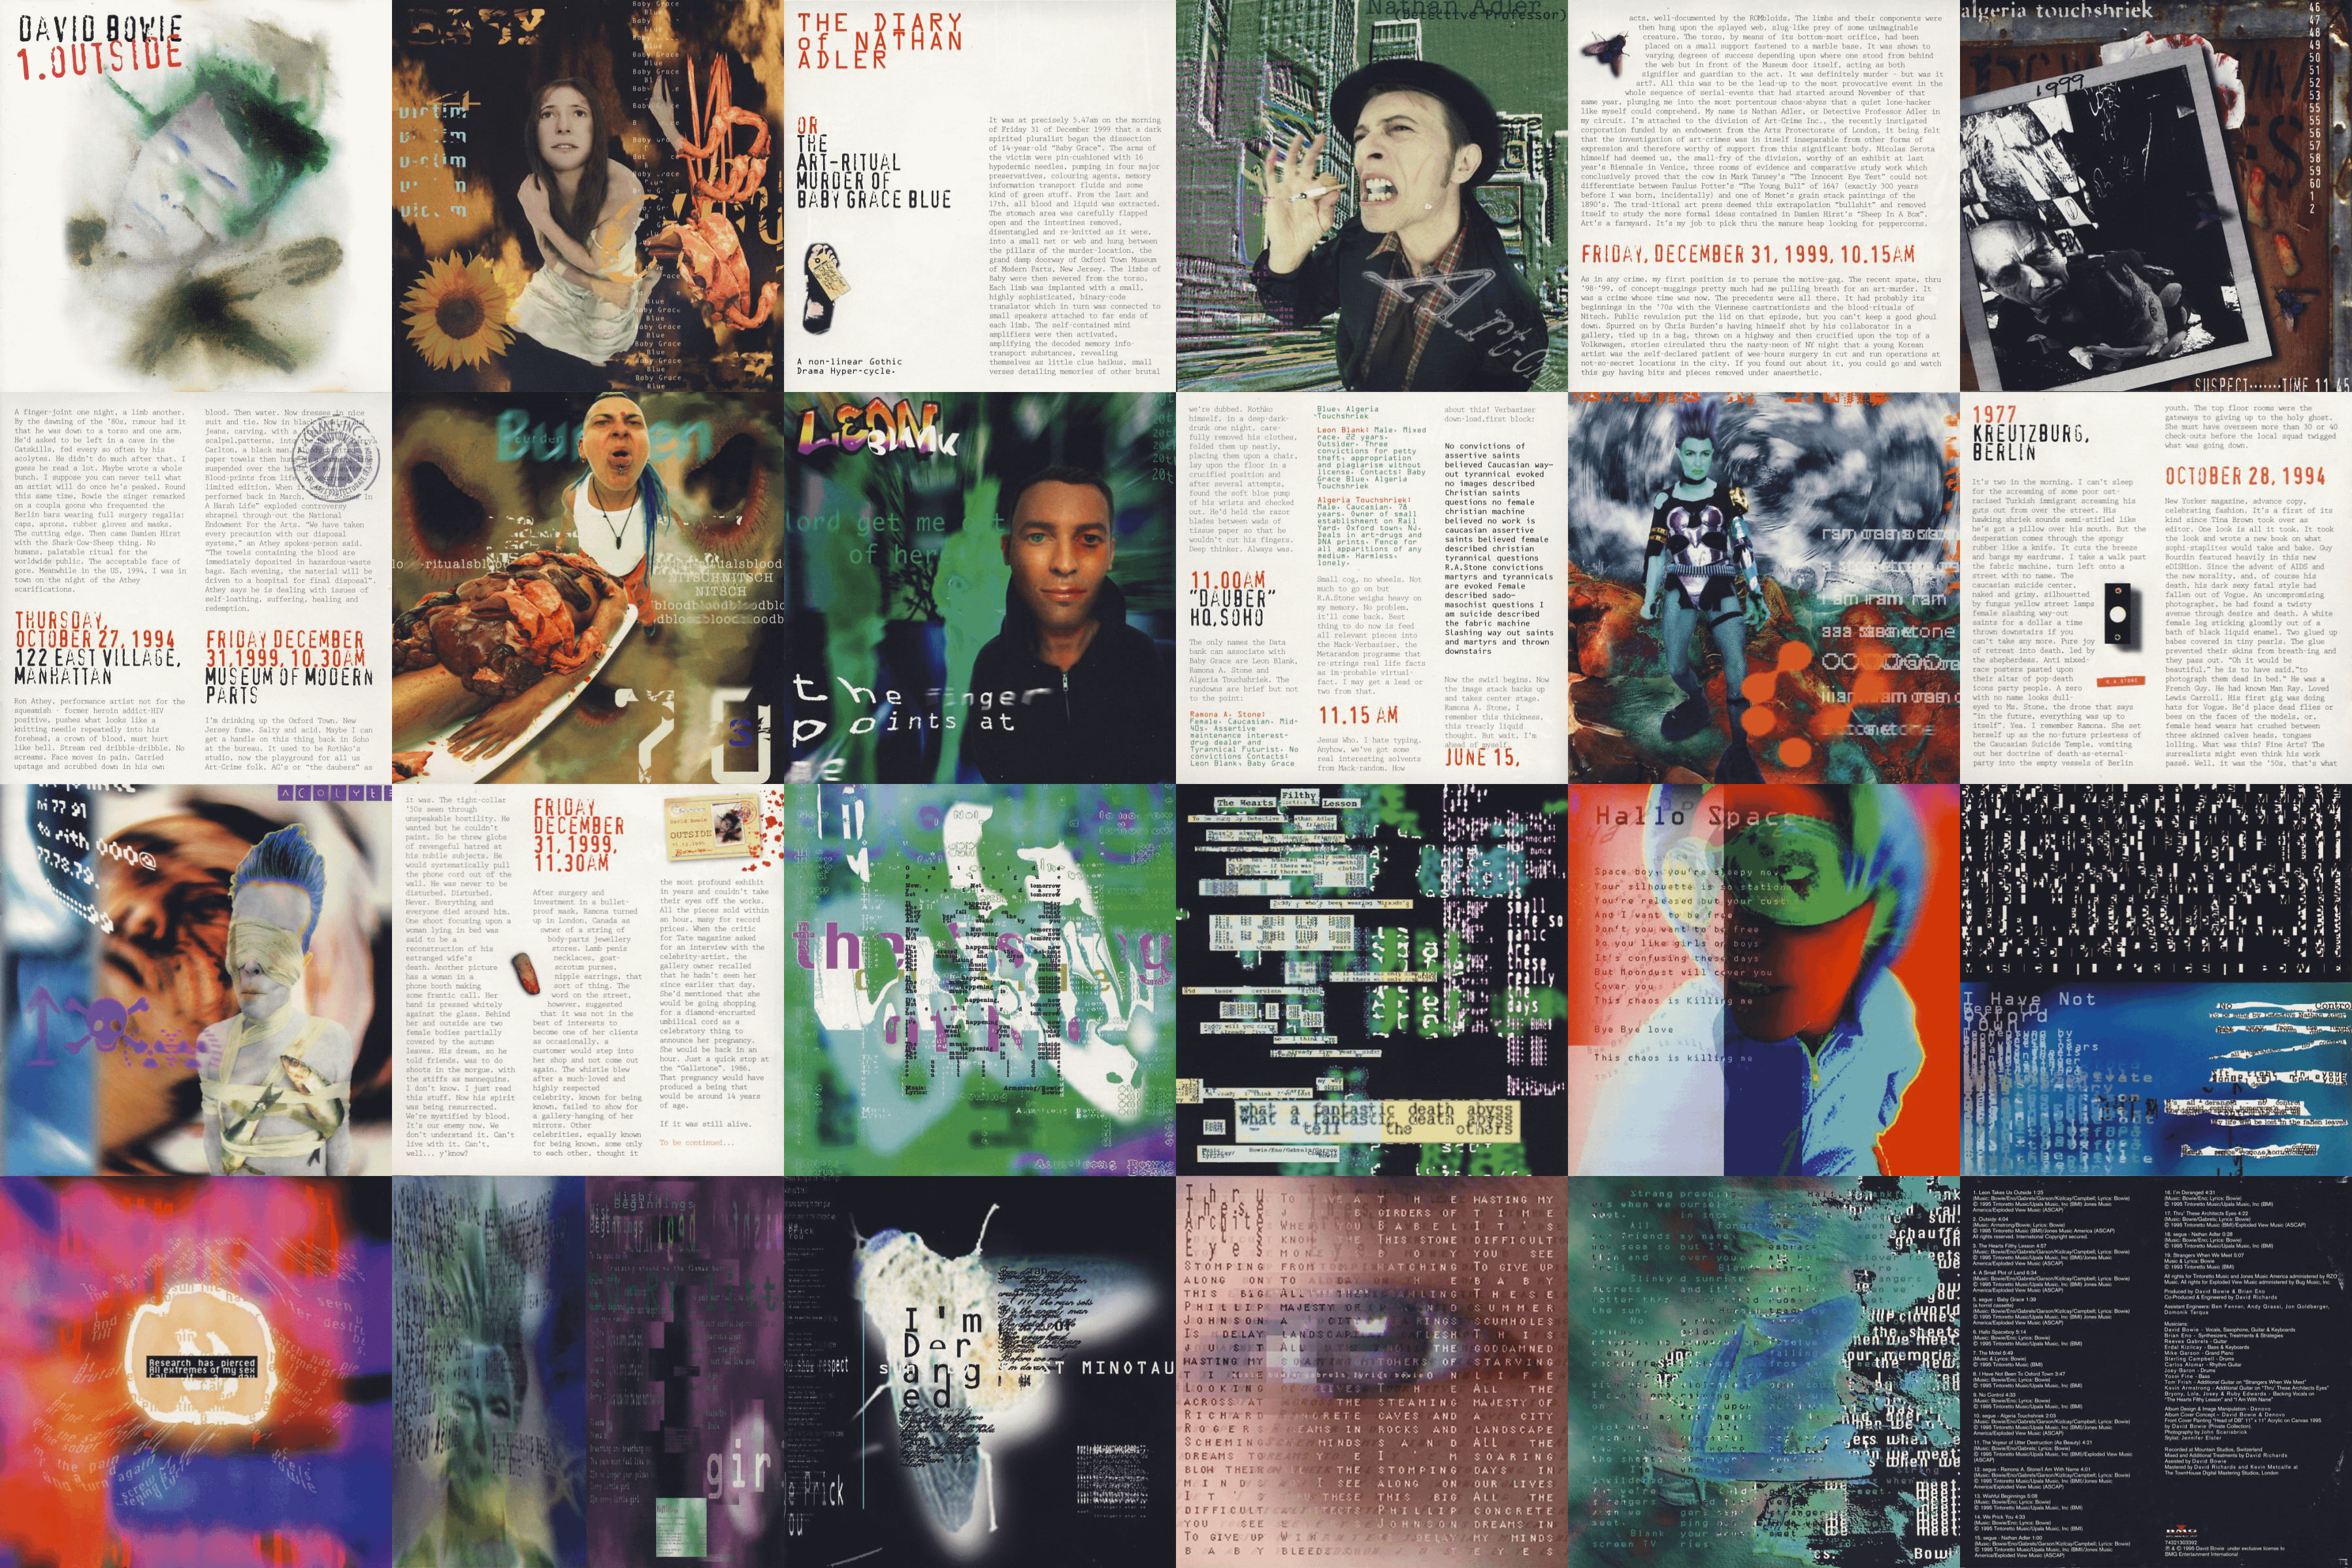 Collage of music magazine covers from the 90s - David Bowie